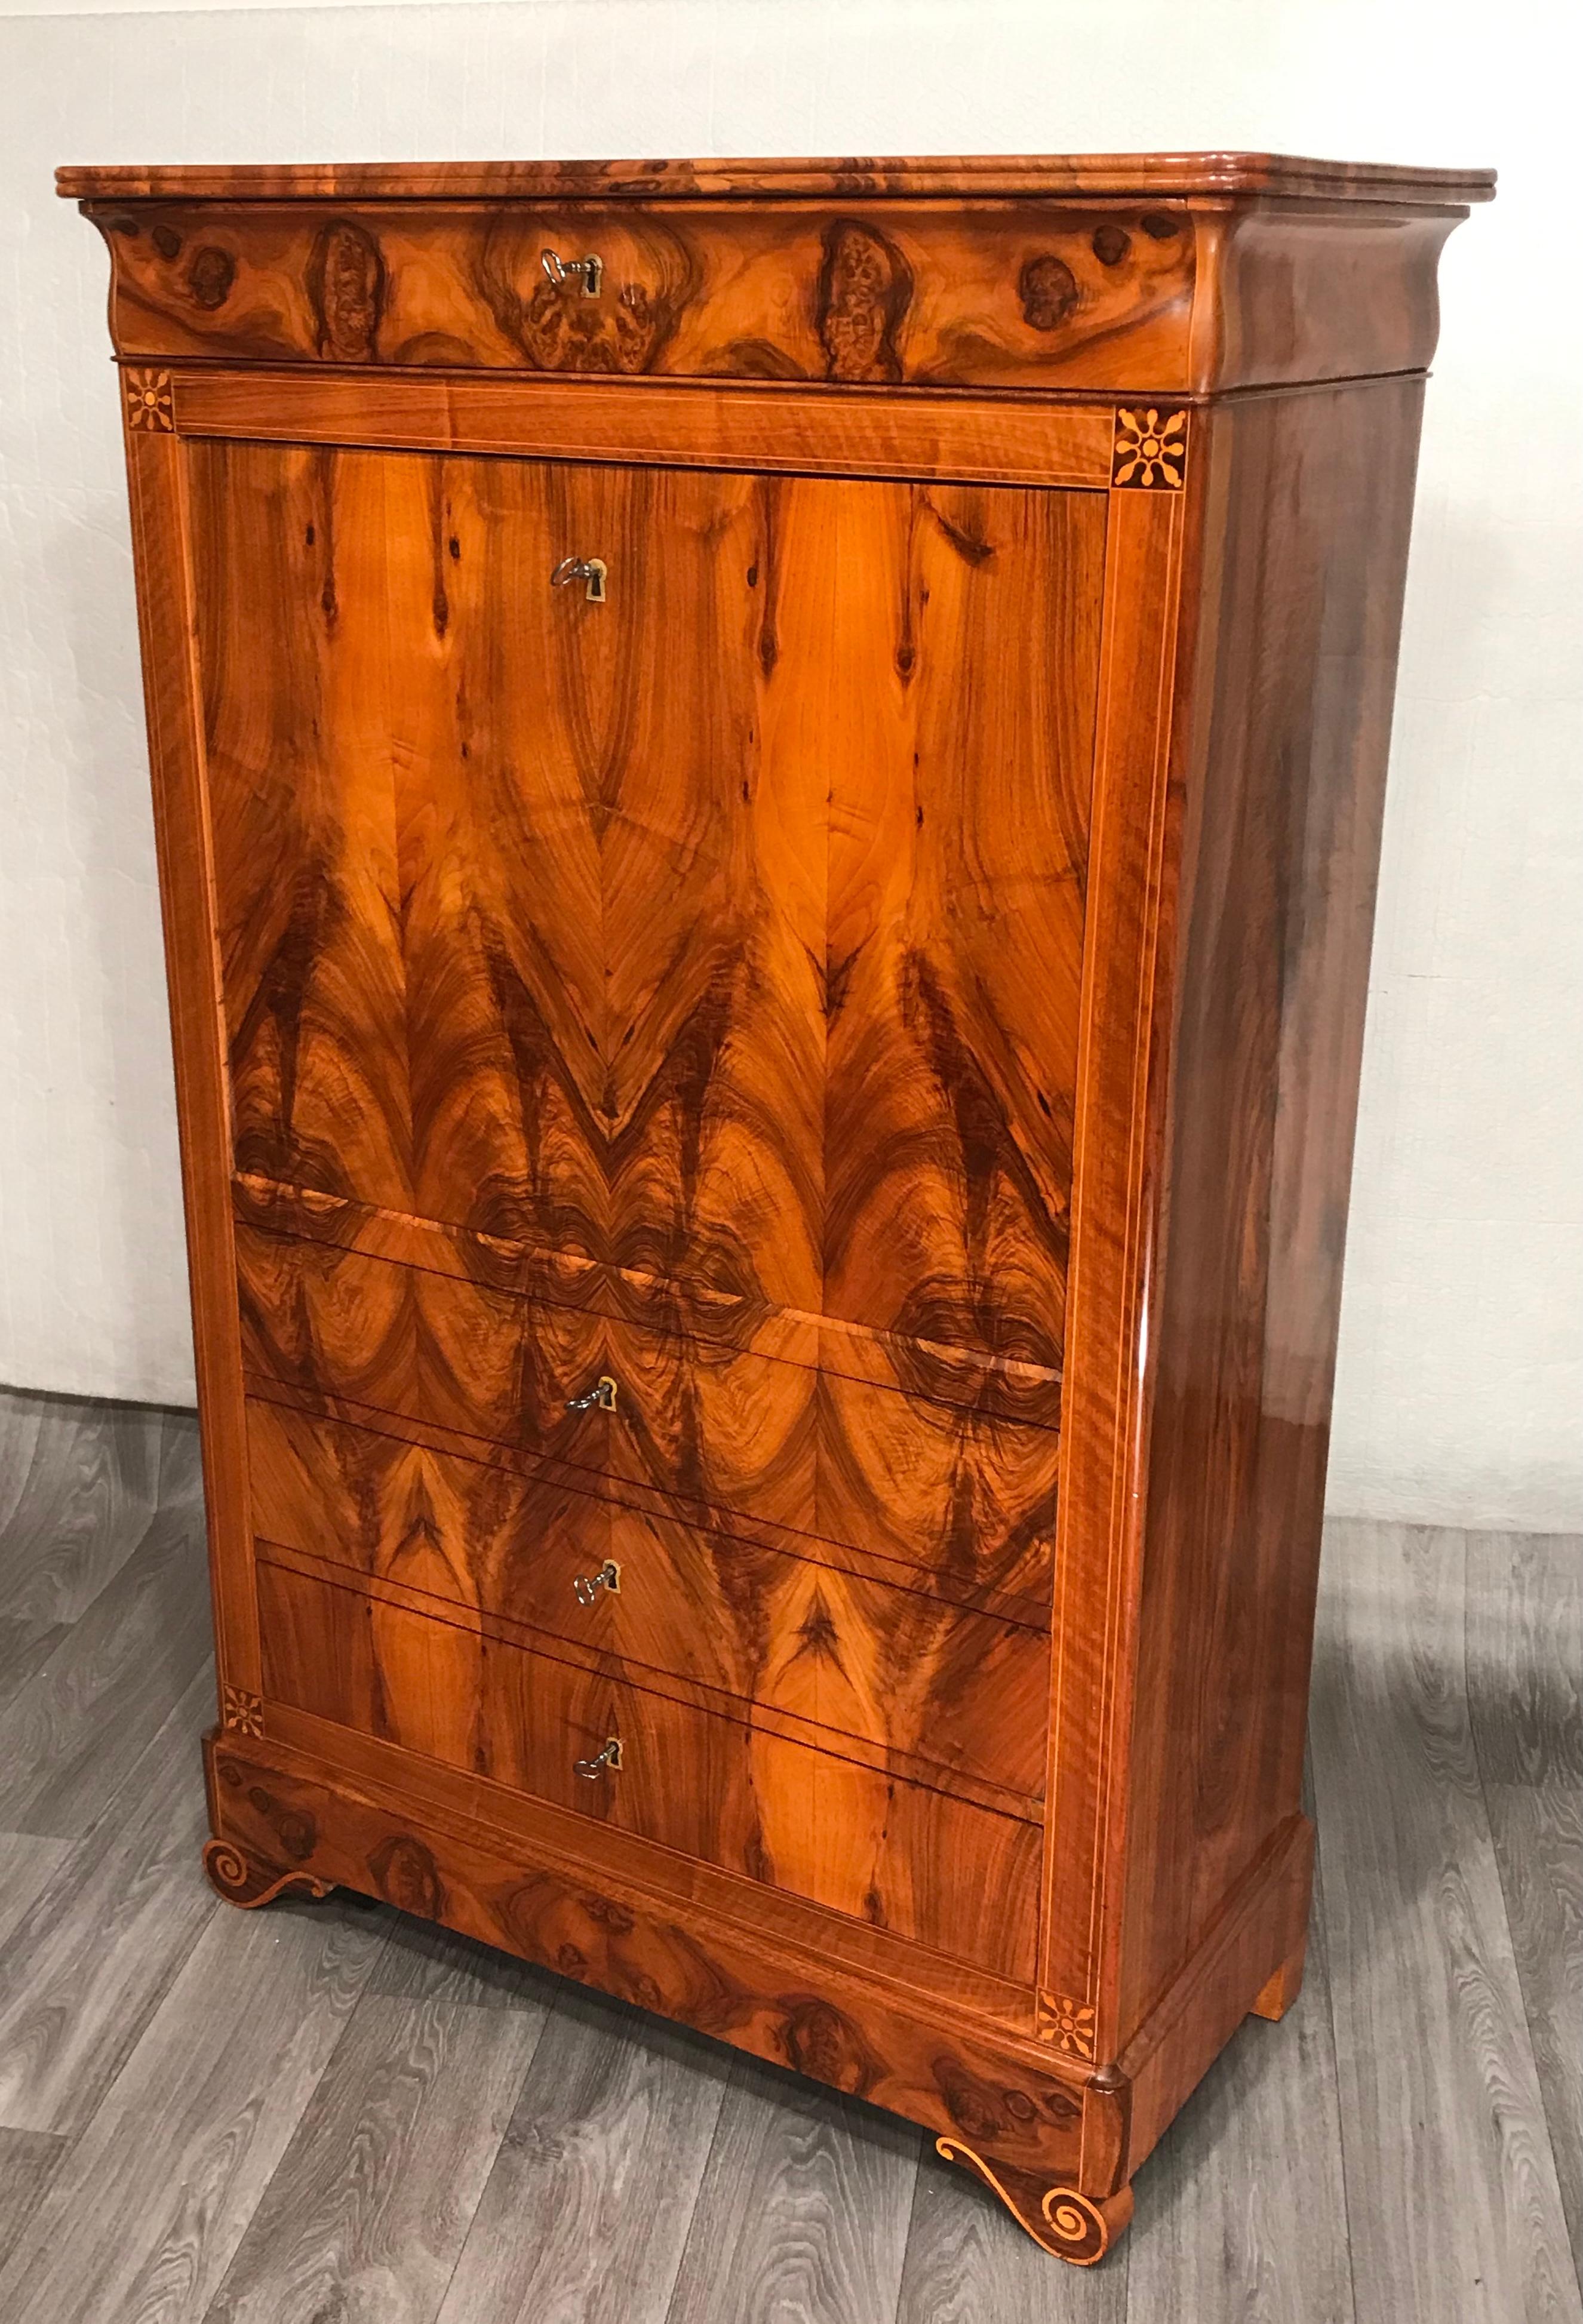 This secretaire a abattant or drop front desk is an absolute masterpiece. It dates back to around 1840 and was made in France. We can determine its place of origin because of a gold embossed coat of arms on the green leather of the writing top. It